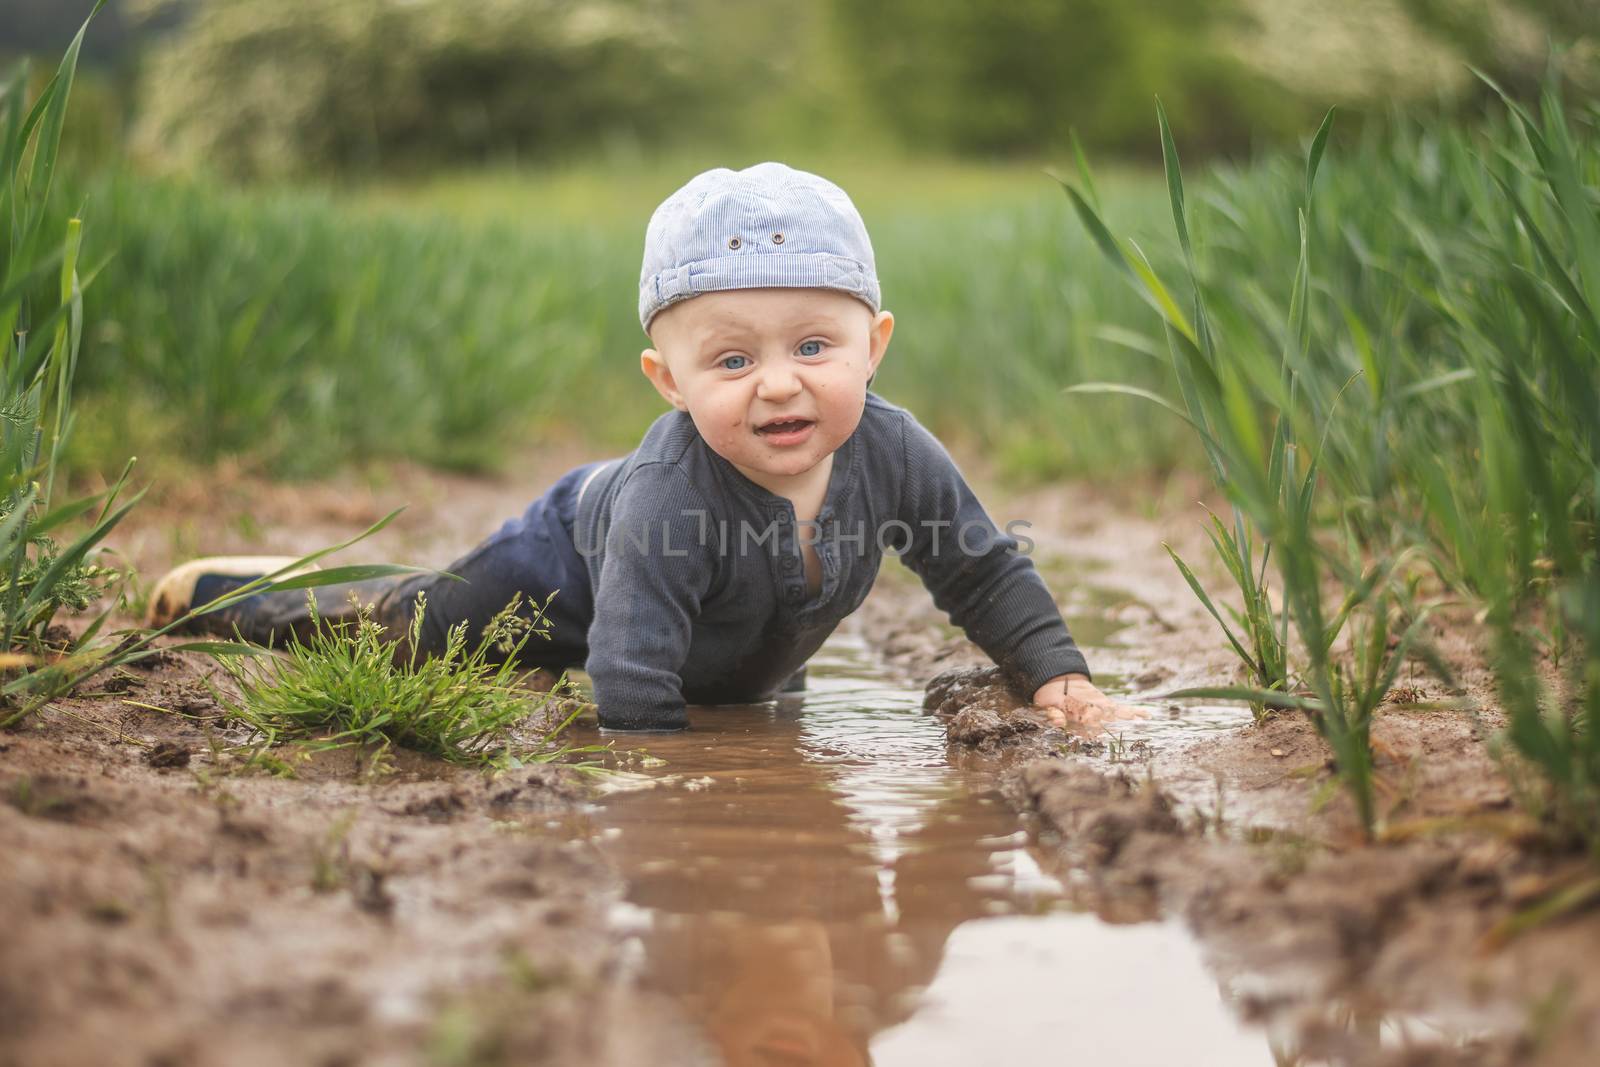 A white infant in a cap plays in a muddy pool. Children's discovery of the world. Looking into the camera.